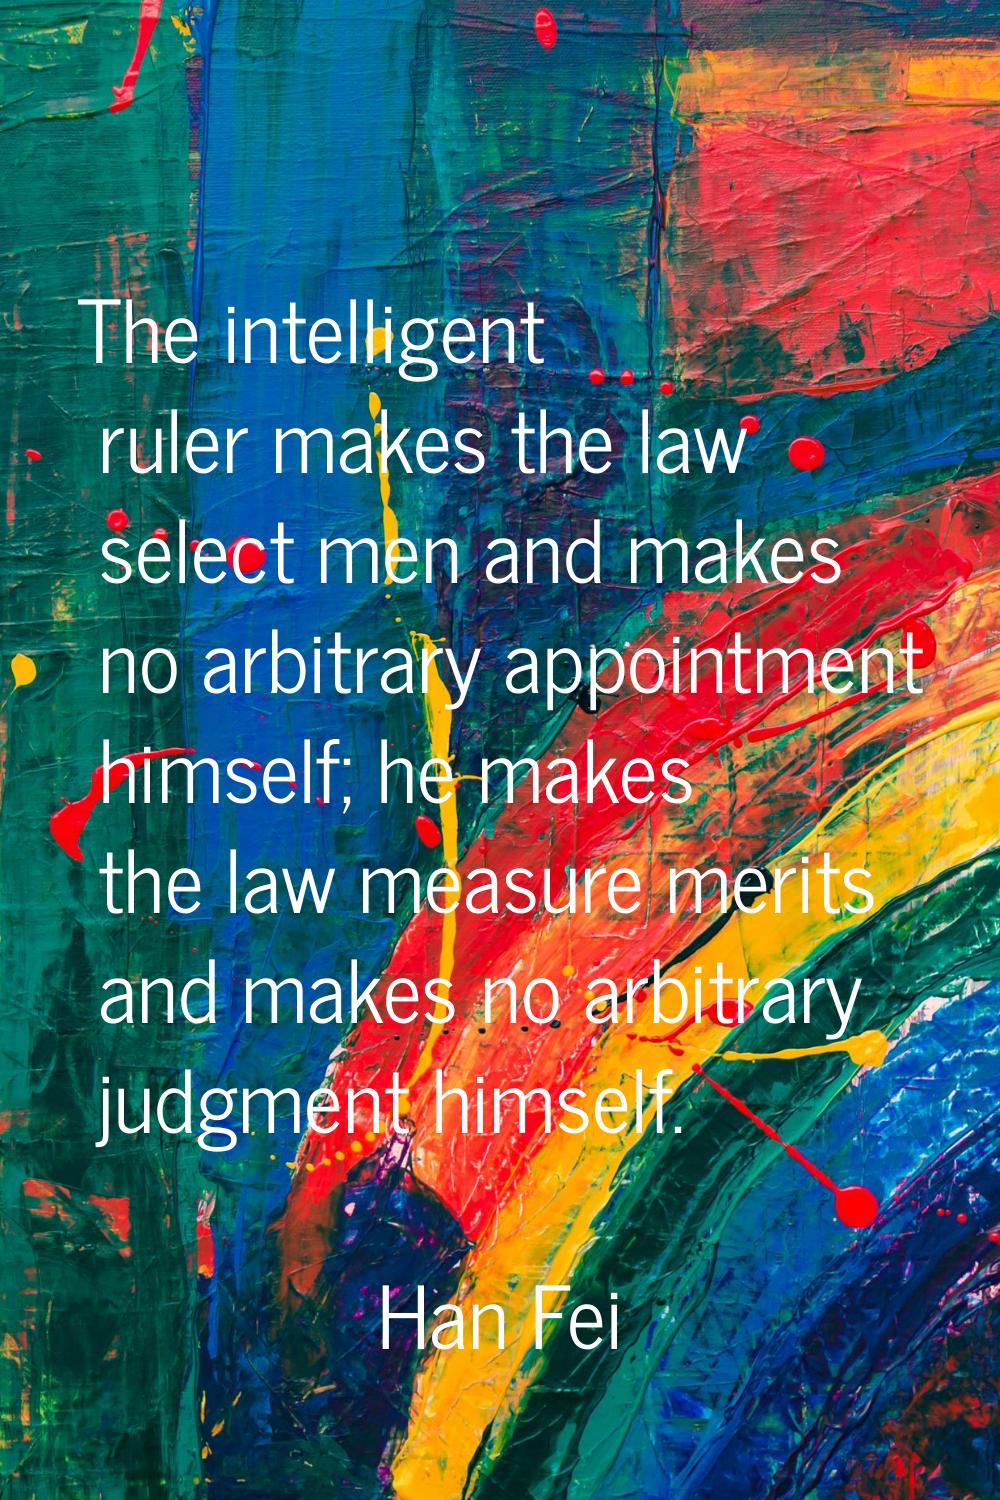 The intelligent ruler makes the law select men and makes no arbitrary appointment himself; he makes